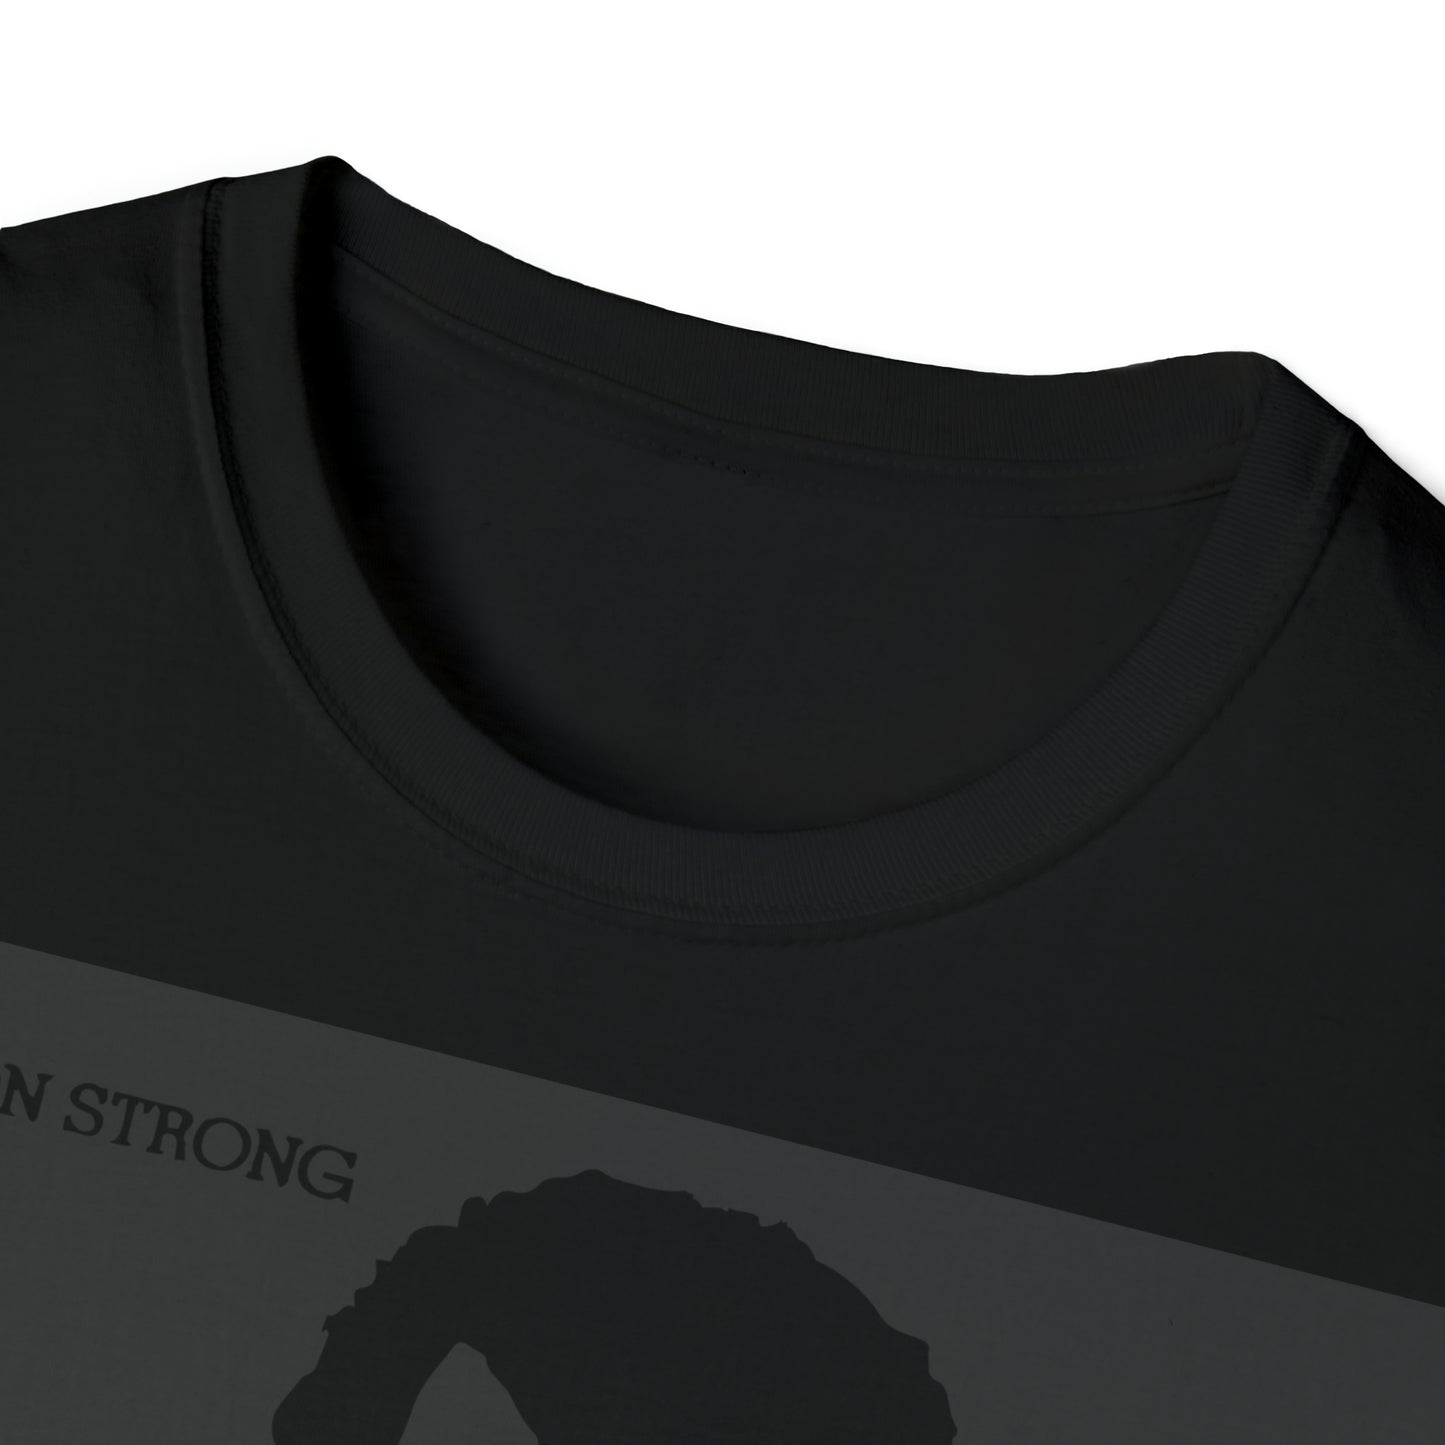 Limited Edition "Comin' On Strong" Unisex Softstyle T-Shirt